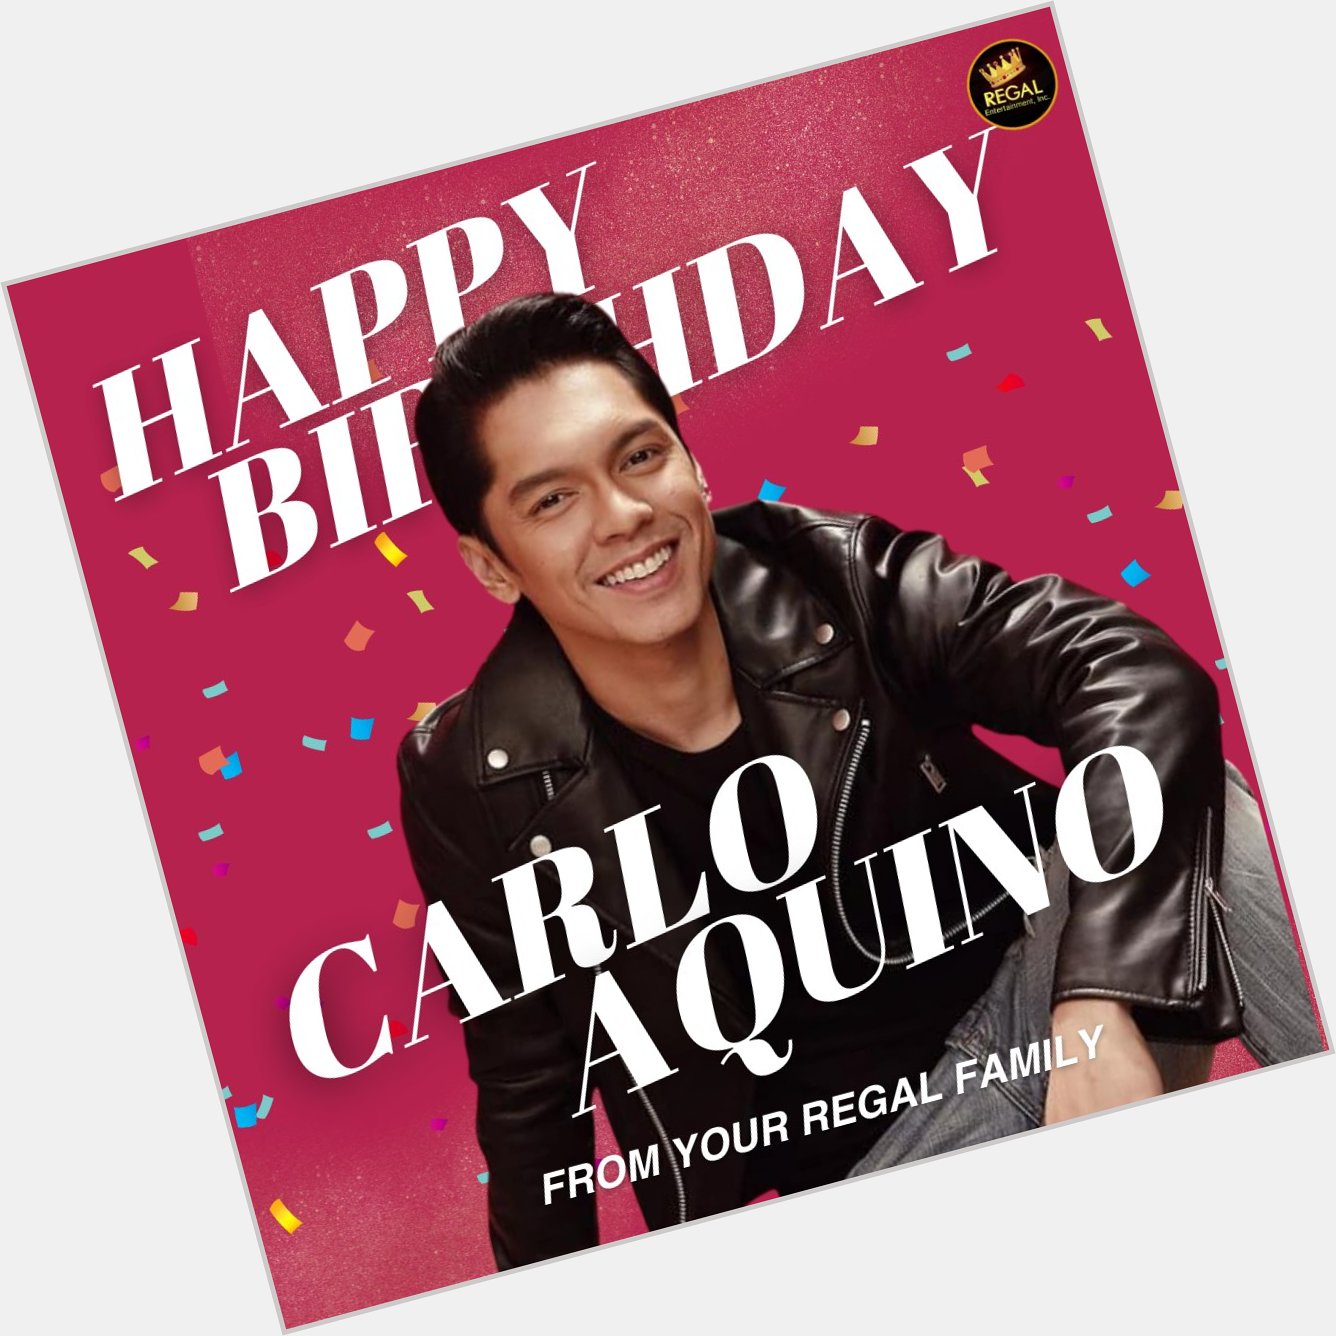 Happy Birthday Carlo Aquino! We wish you all the best in life! From your Regal Family!  